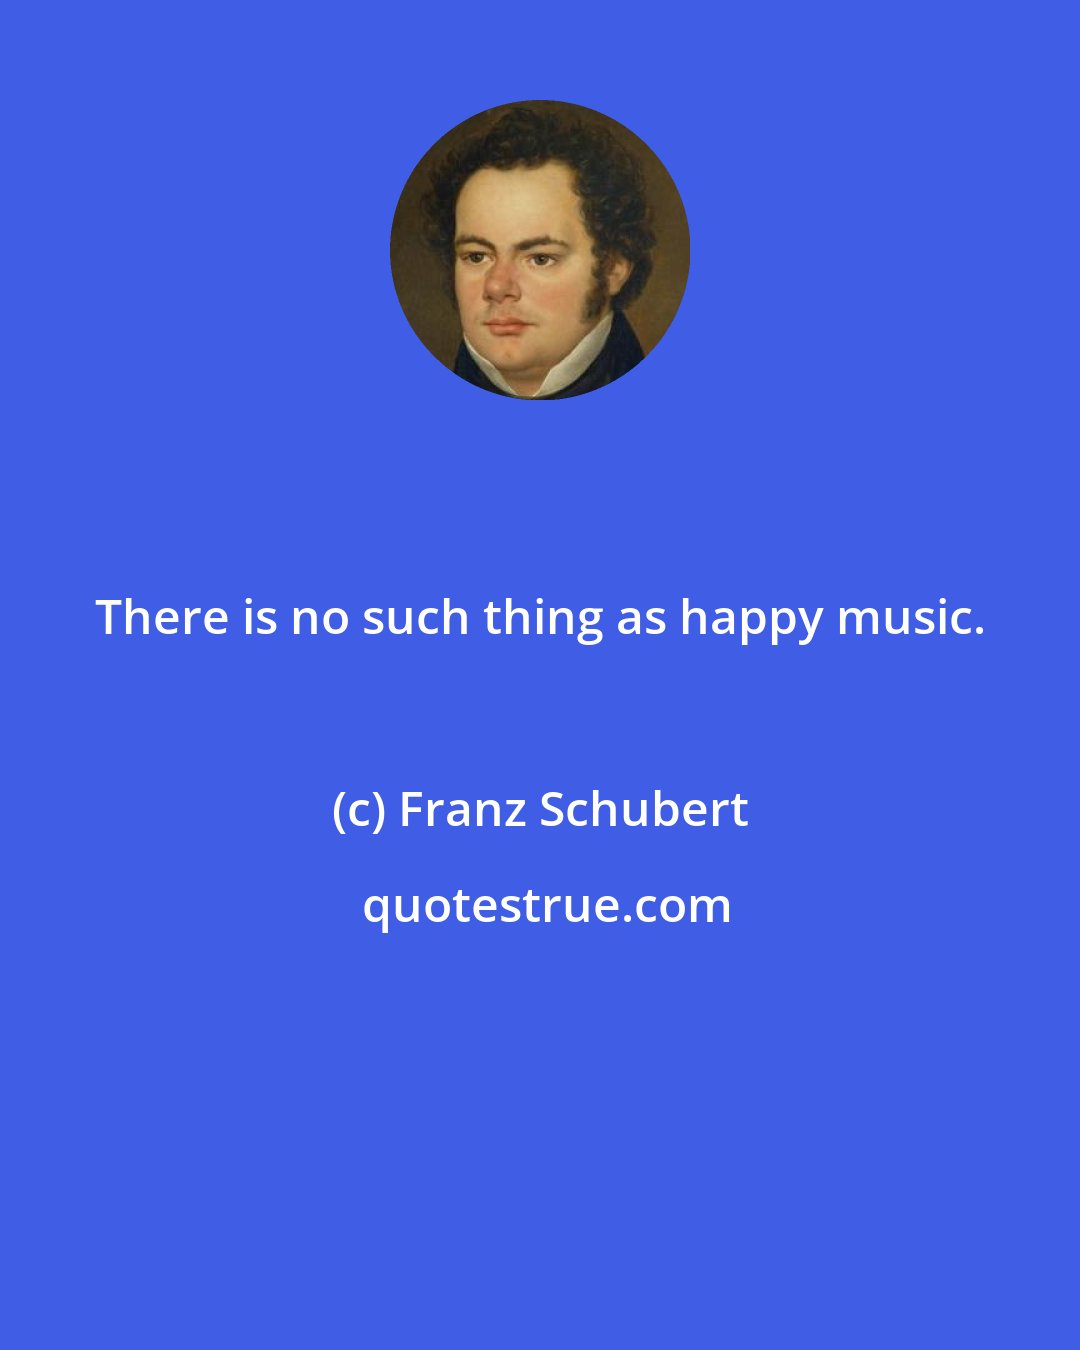 Franz Schubert: There is no such thing as happy music.